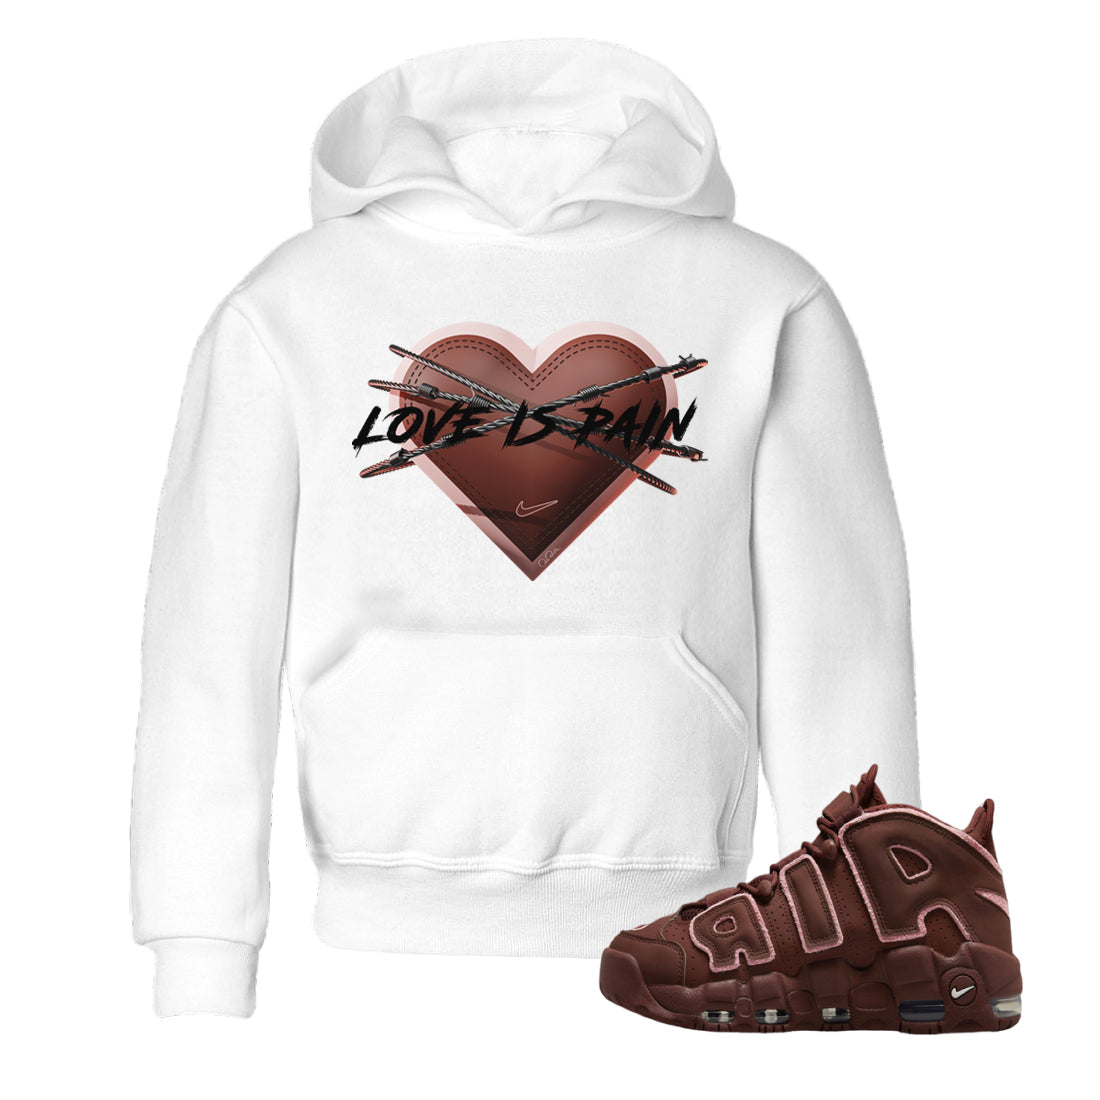 Air More Uptempo Valentines Day Sneaker Match Tees Love is Pain Sneaker Tees Air More Uptempo Valentines Day Sneaker Release Tees Kids Shirts